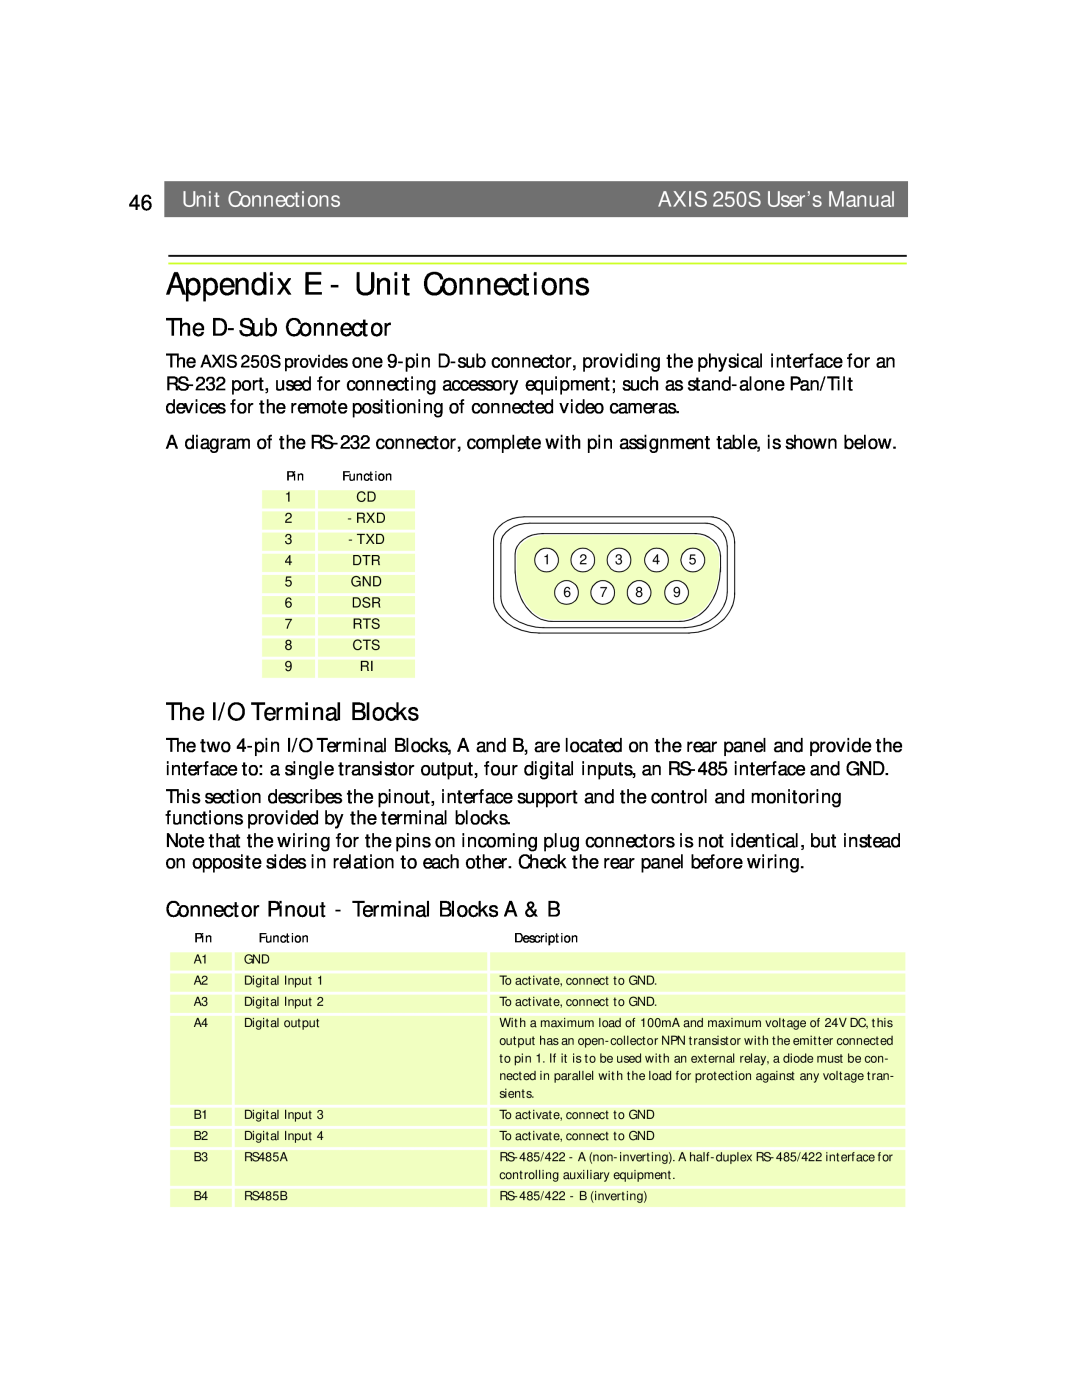 Axis Communications 250S user manual Appendix E - Unit Connections, The D-Sub Connector, The I/O Terminal Blocks 